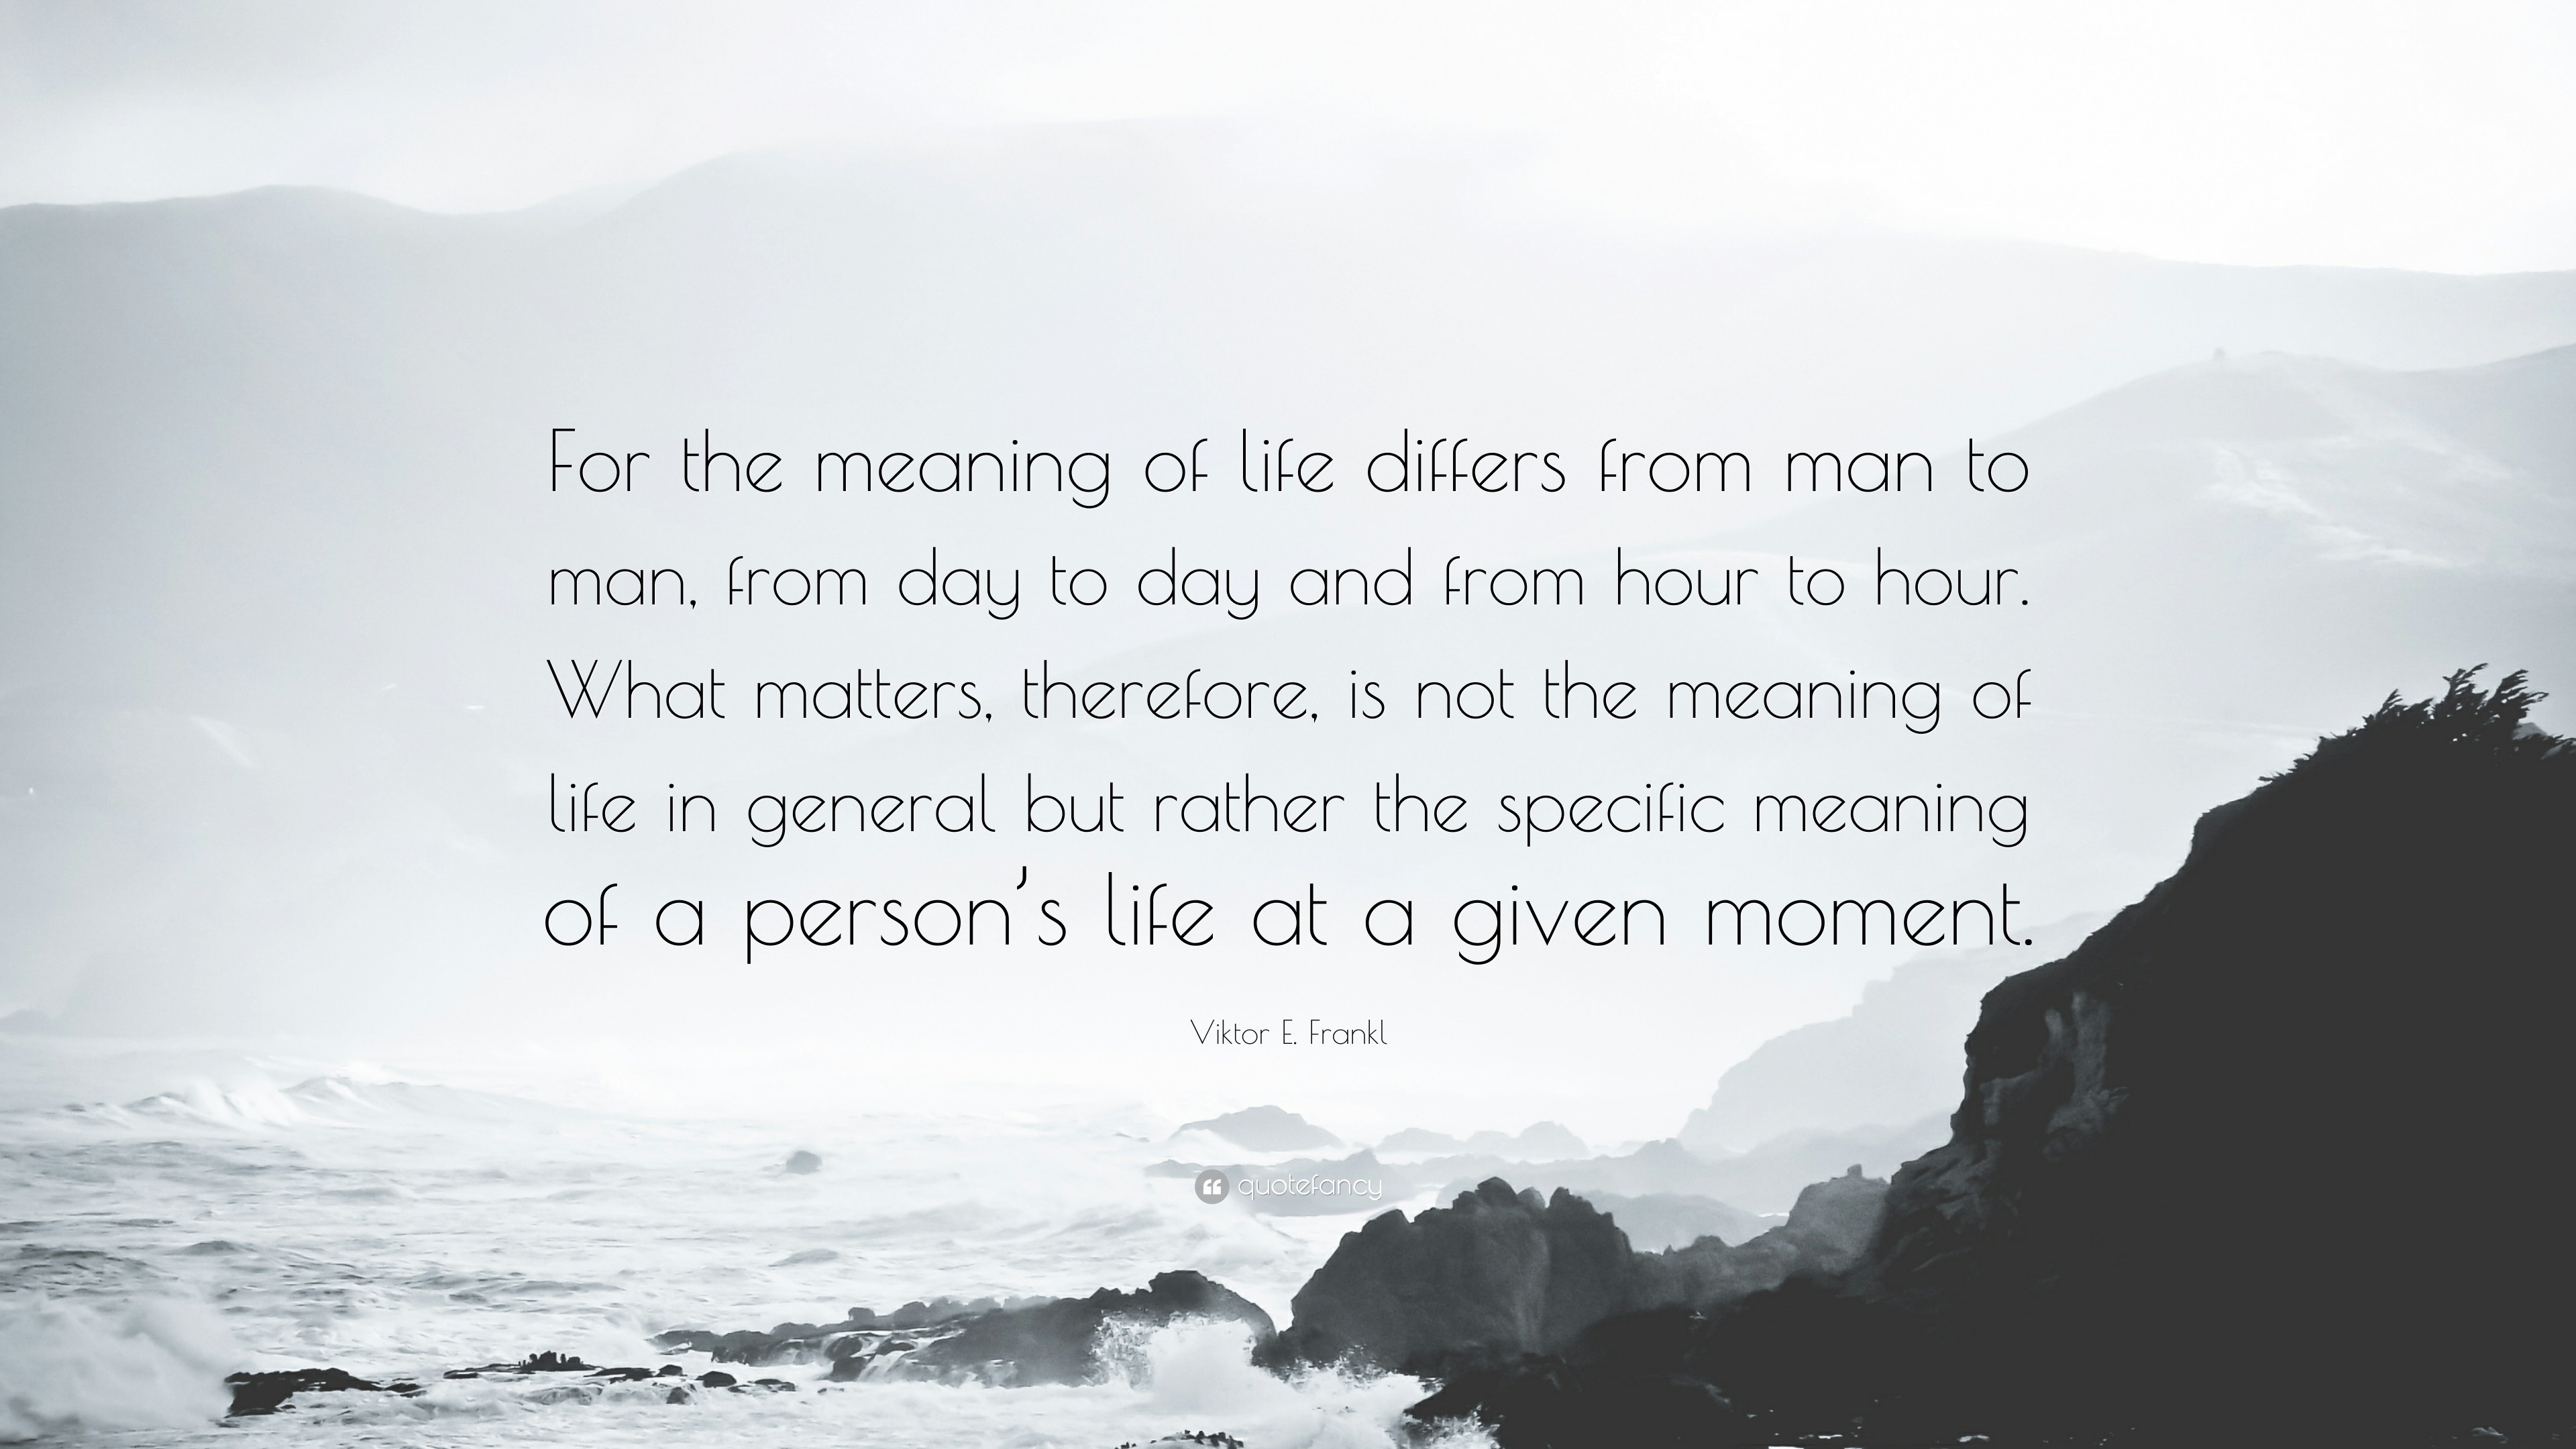 Viktor E Frankl Quote “For the meaning of life differs from man to